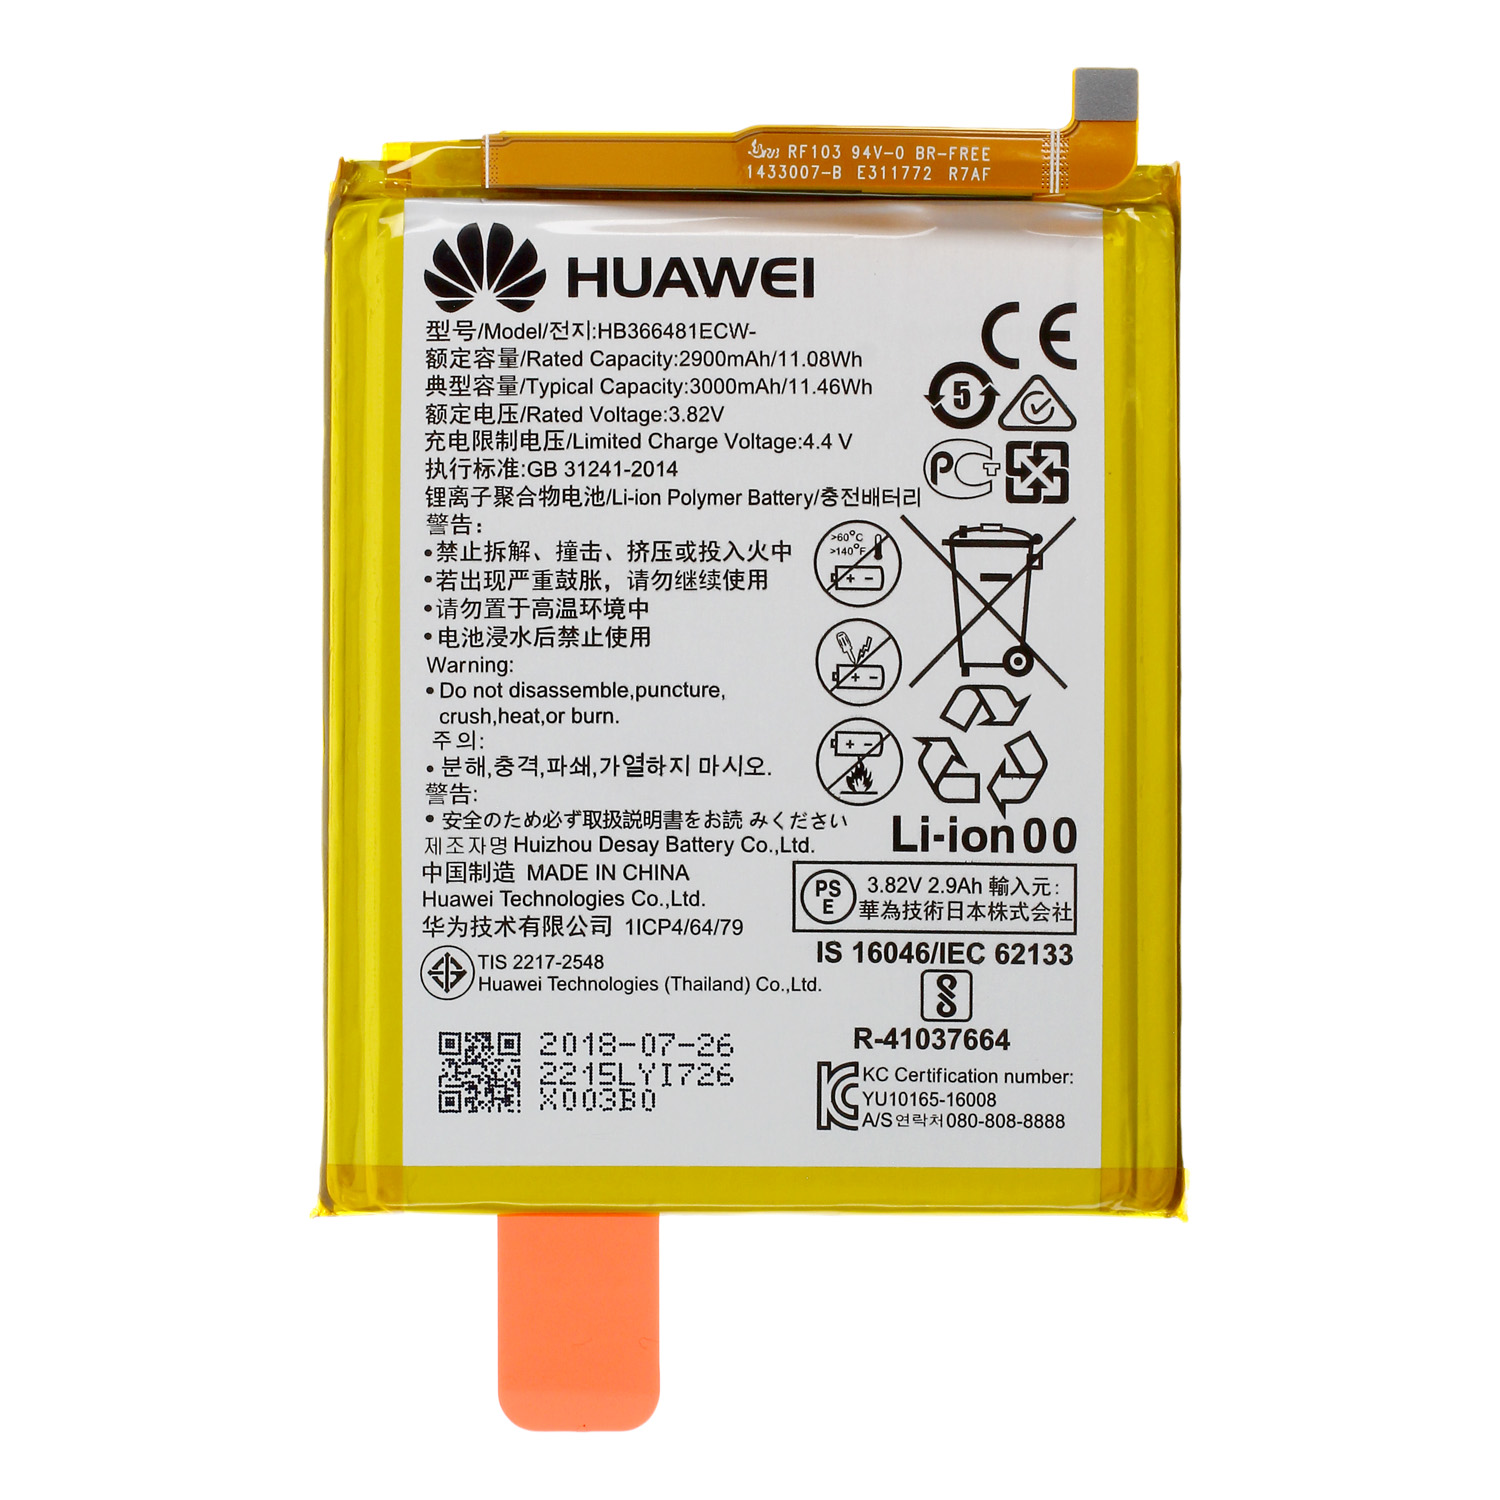 Huawei Battery HB366481ECW for Y7 2018/Honor 8/P9/P9 Lite P10 lite/P8 lite 2017/P20 Lite/P Smart/Honor8lite/ Honor 9 Lite